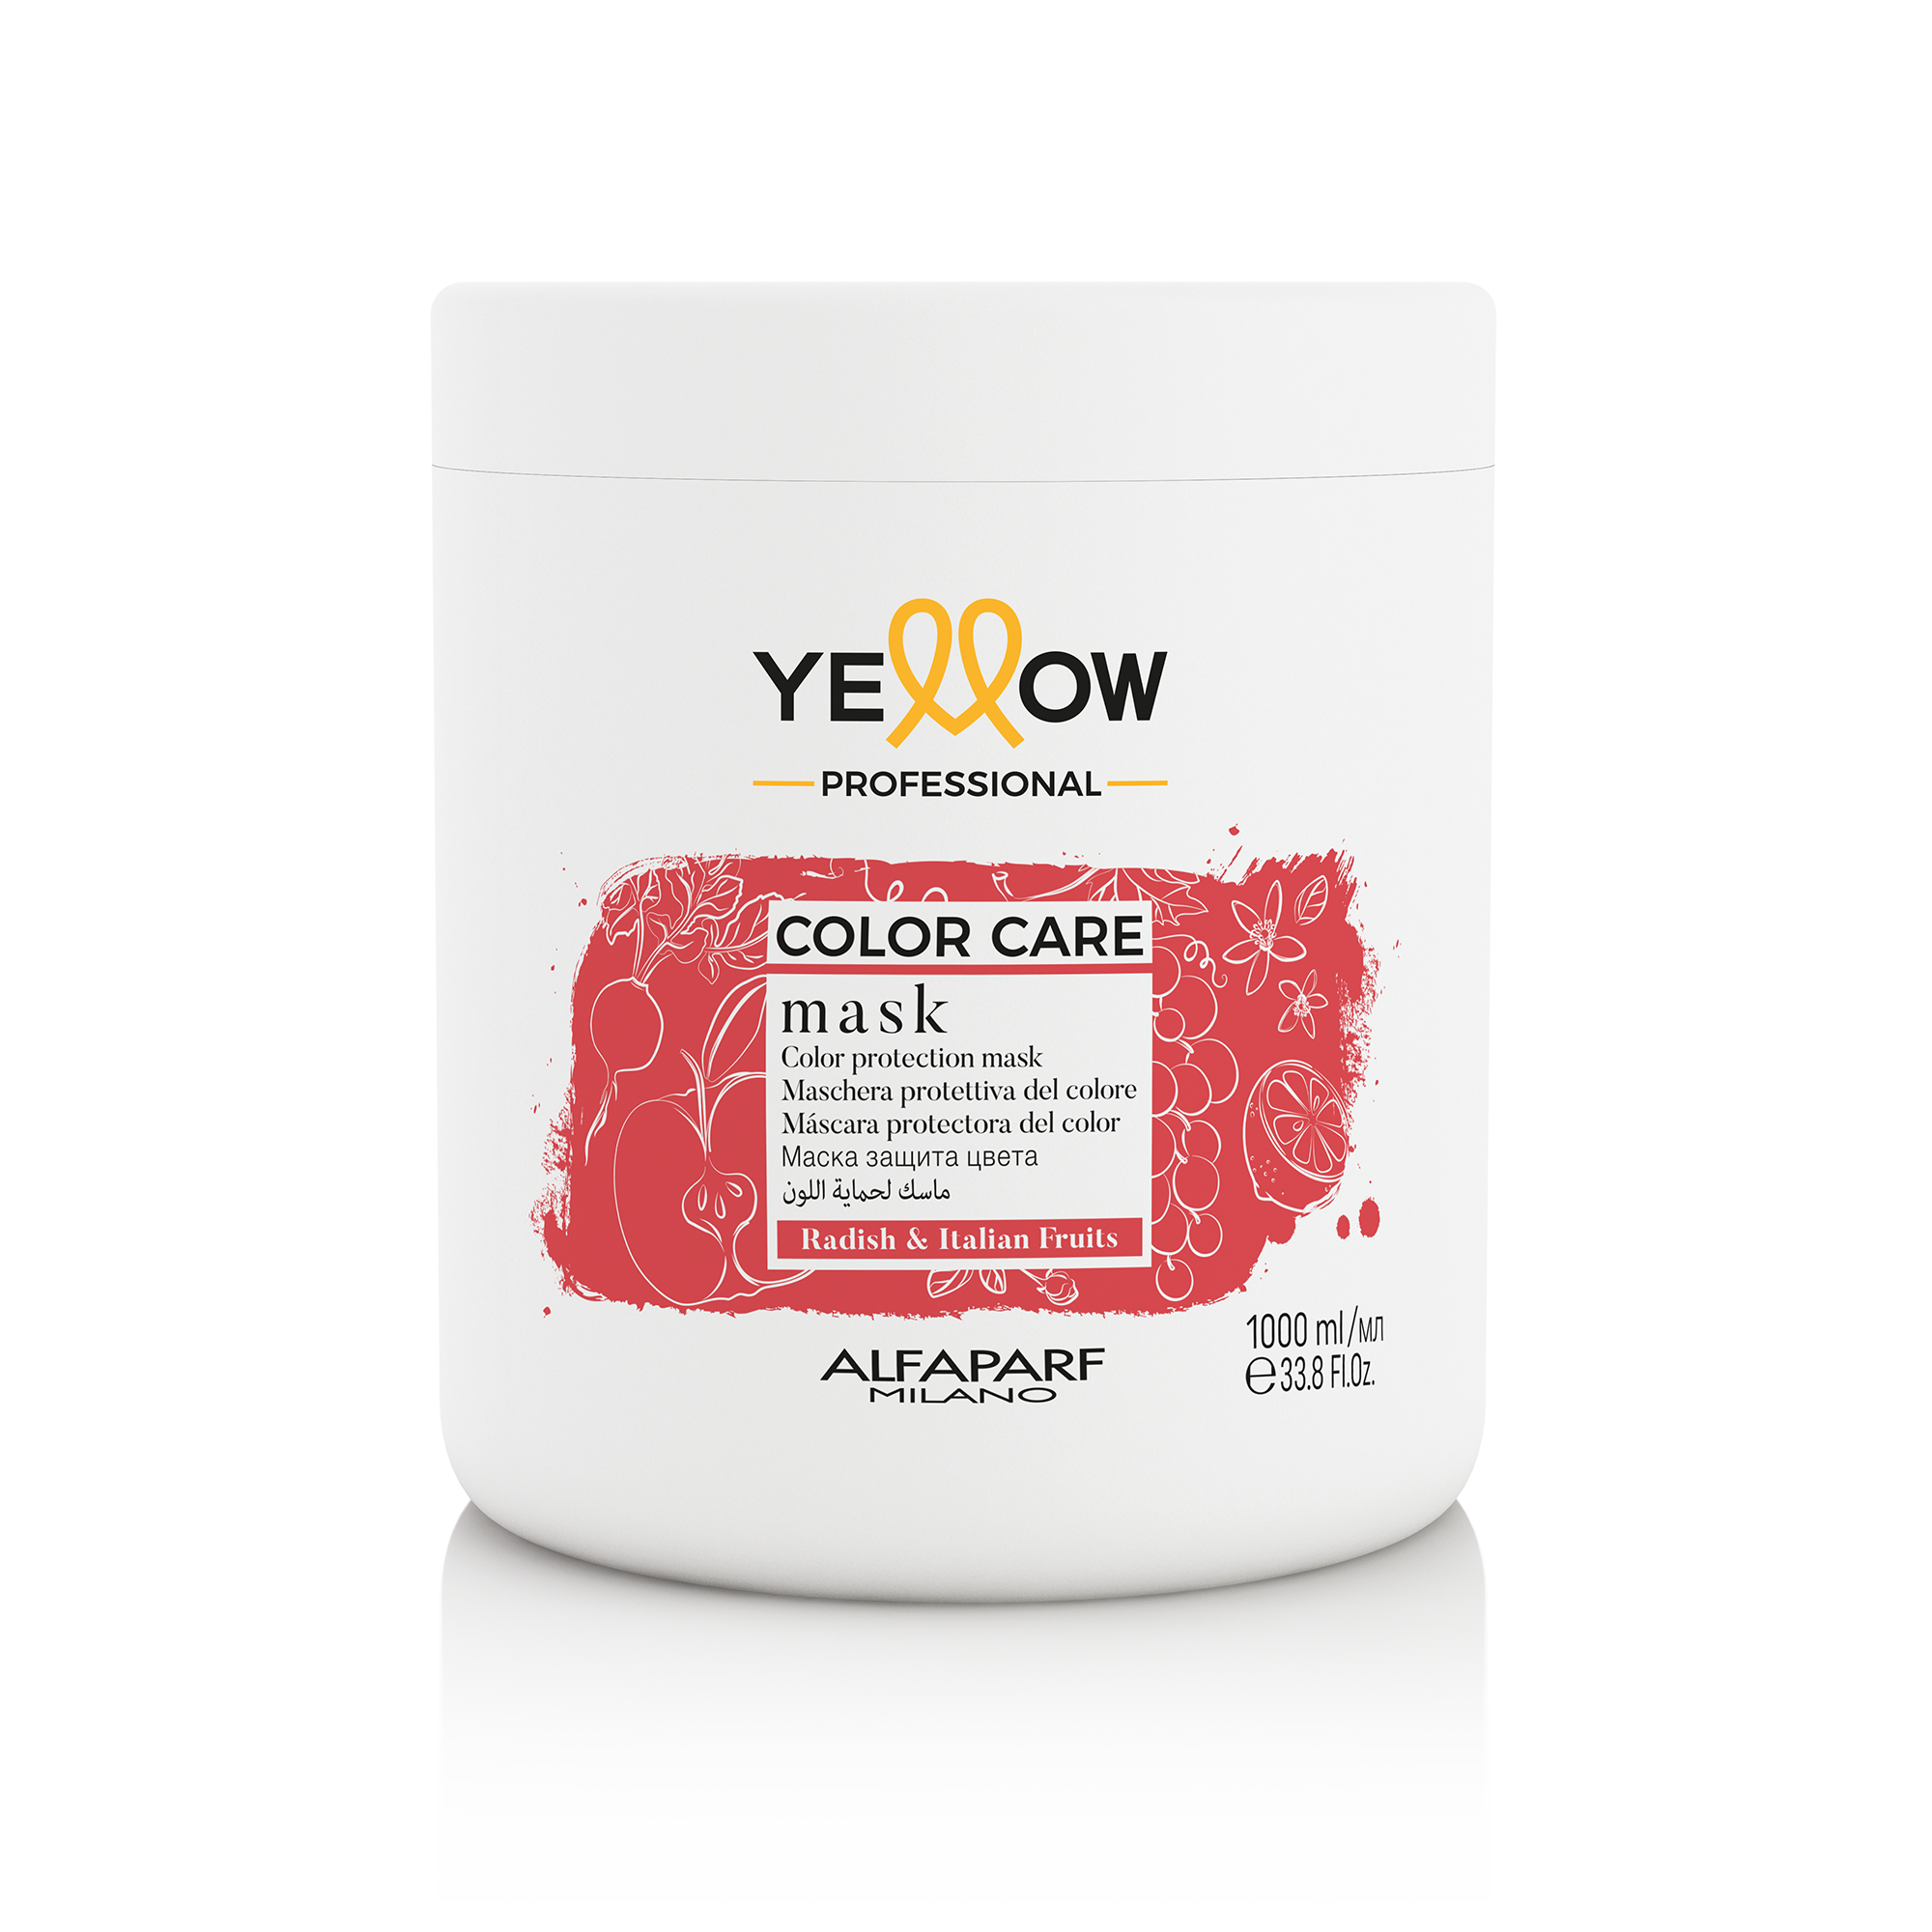 COLOR CARE MASK - Yellowpro